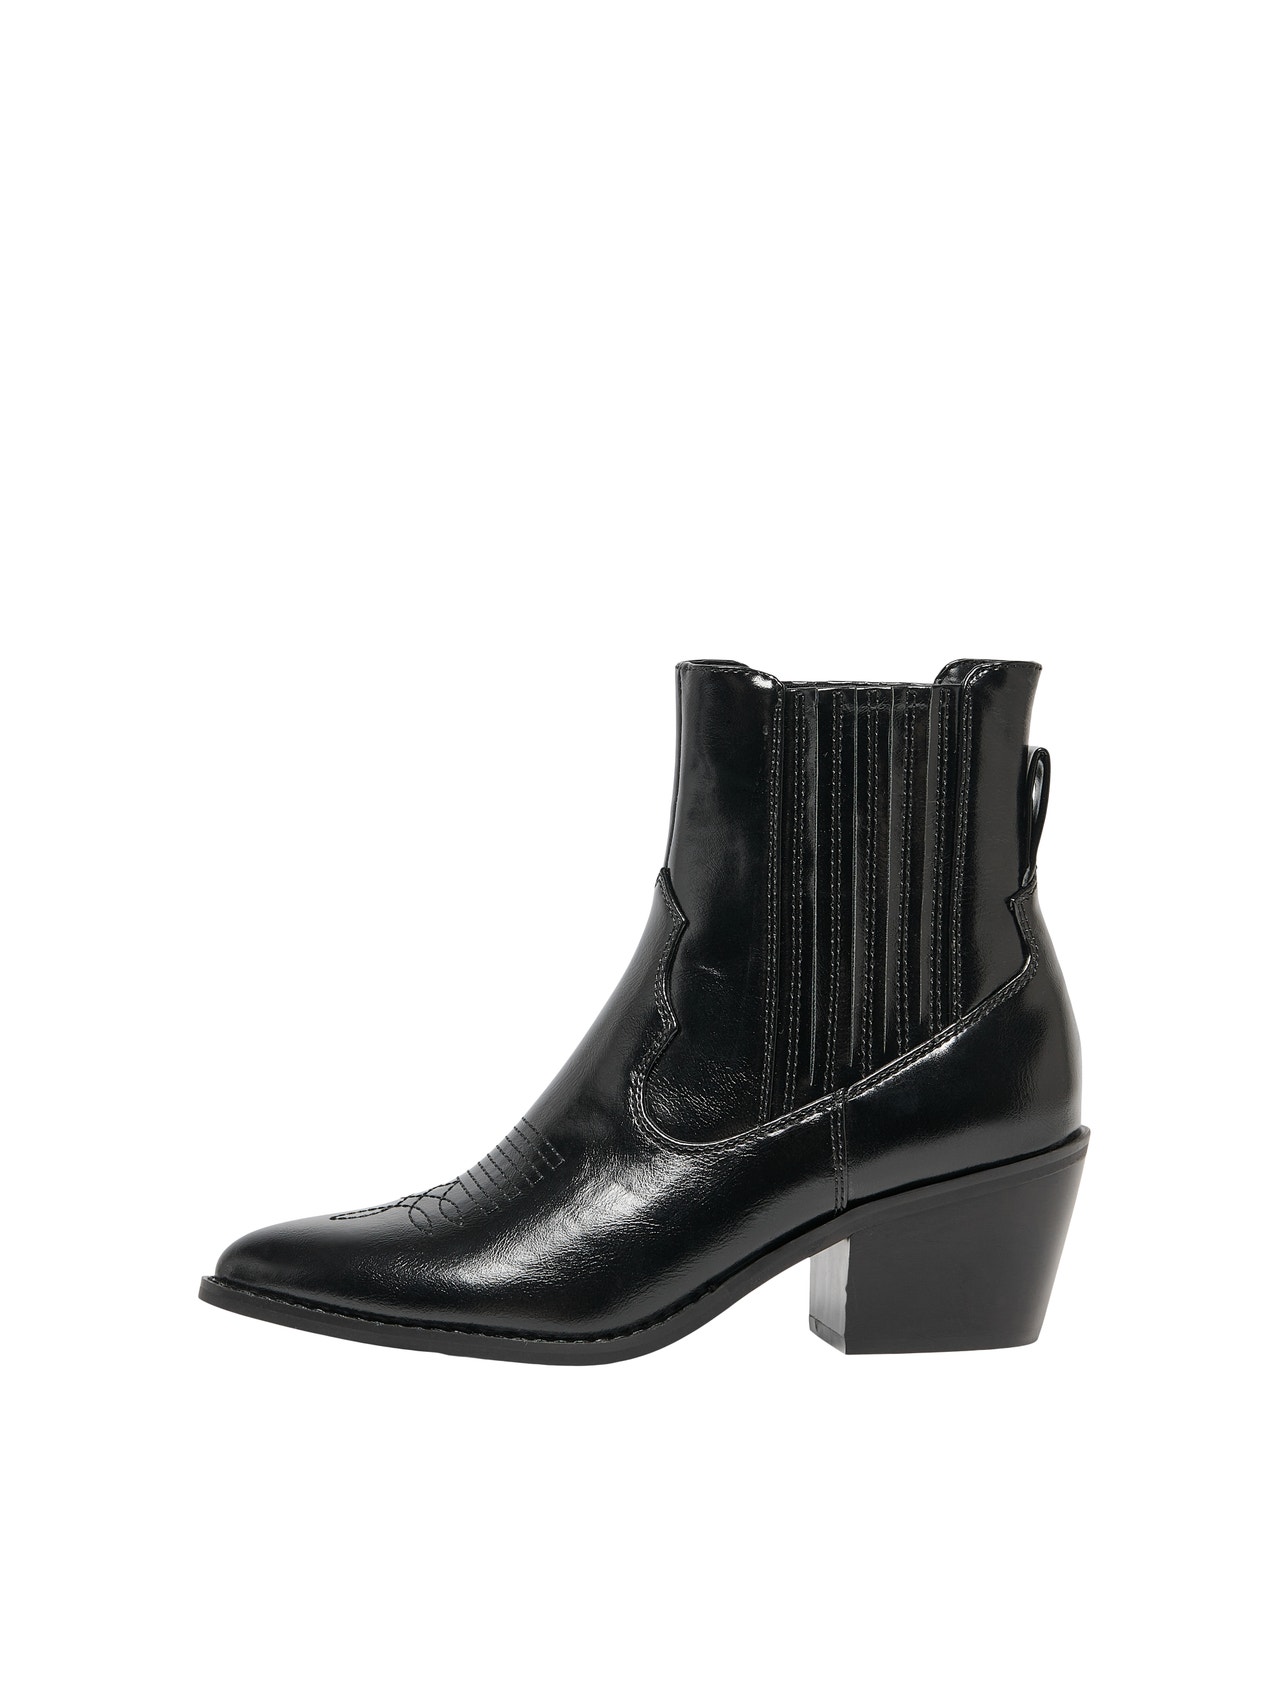 ONLY Cowboy Boots -Black - 15271800